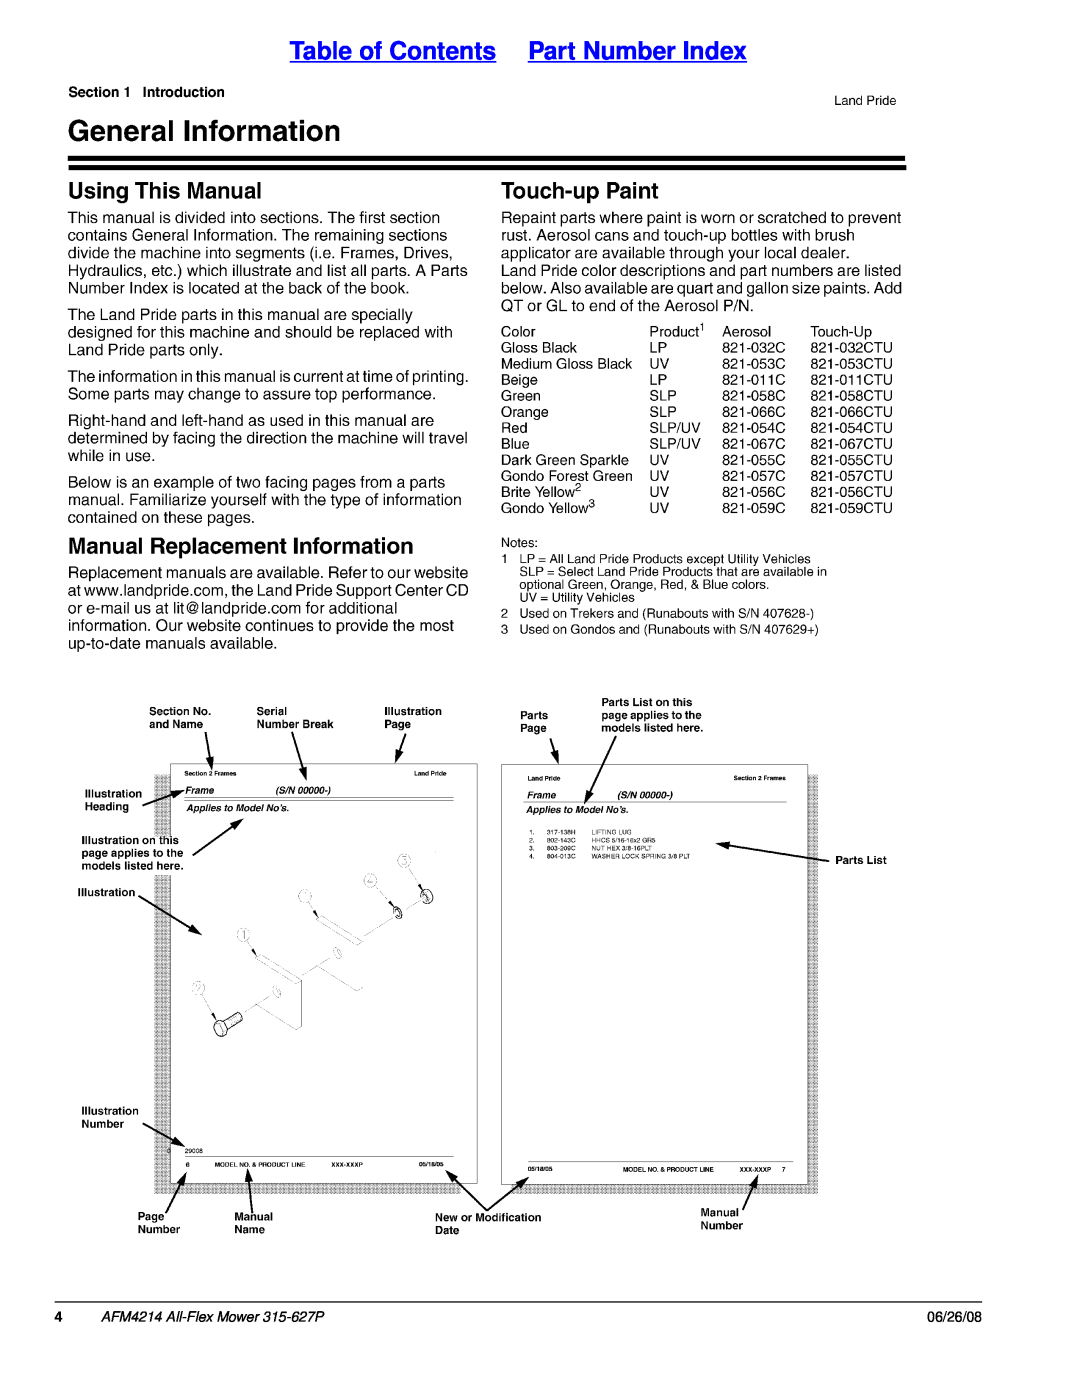 Land Pride manual Table of Contents Part Number Index, AFM4214 All-FlexMower 315-627P, 06/26/08 